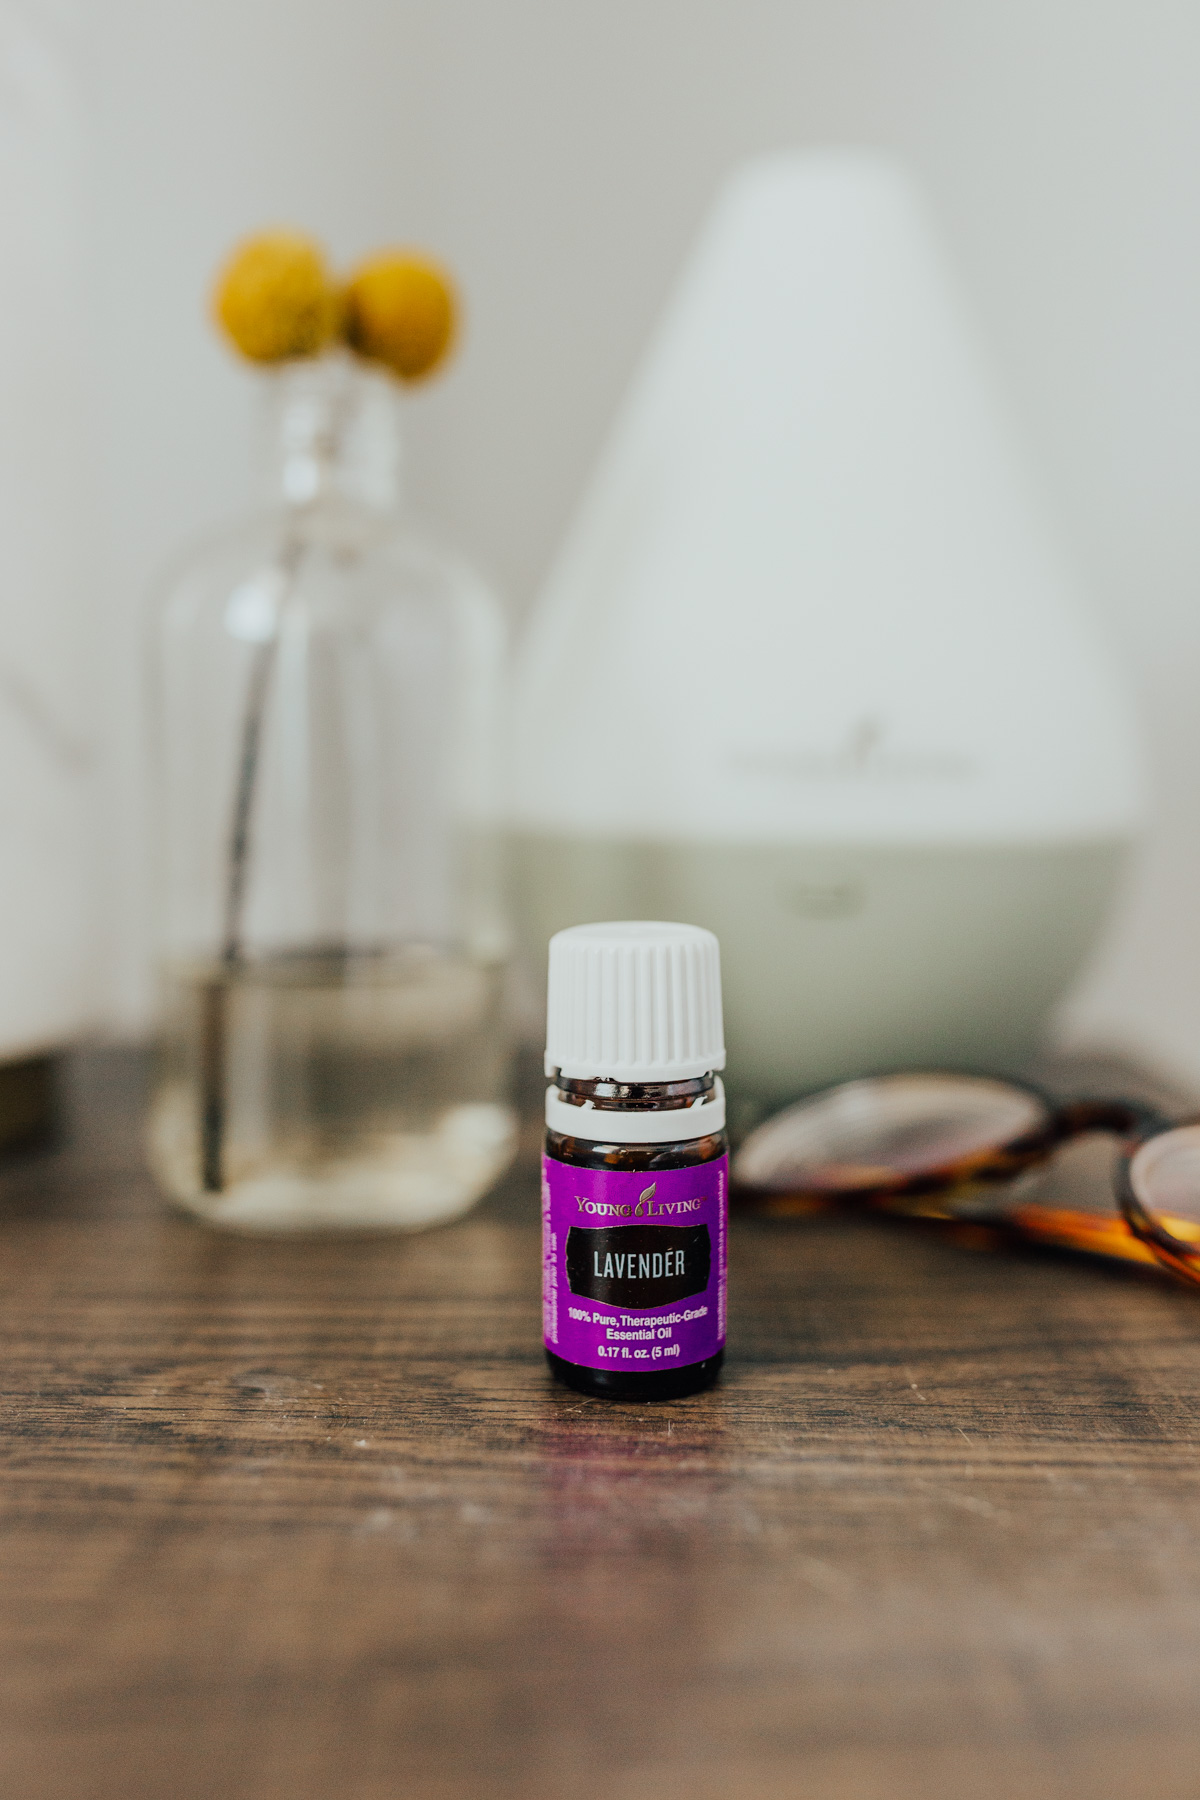 Lavender essential oil for sleep support